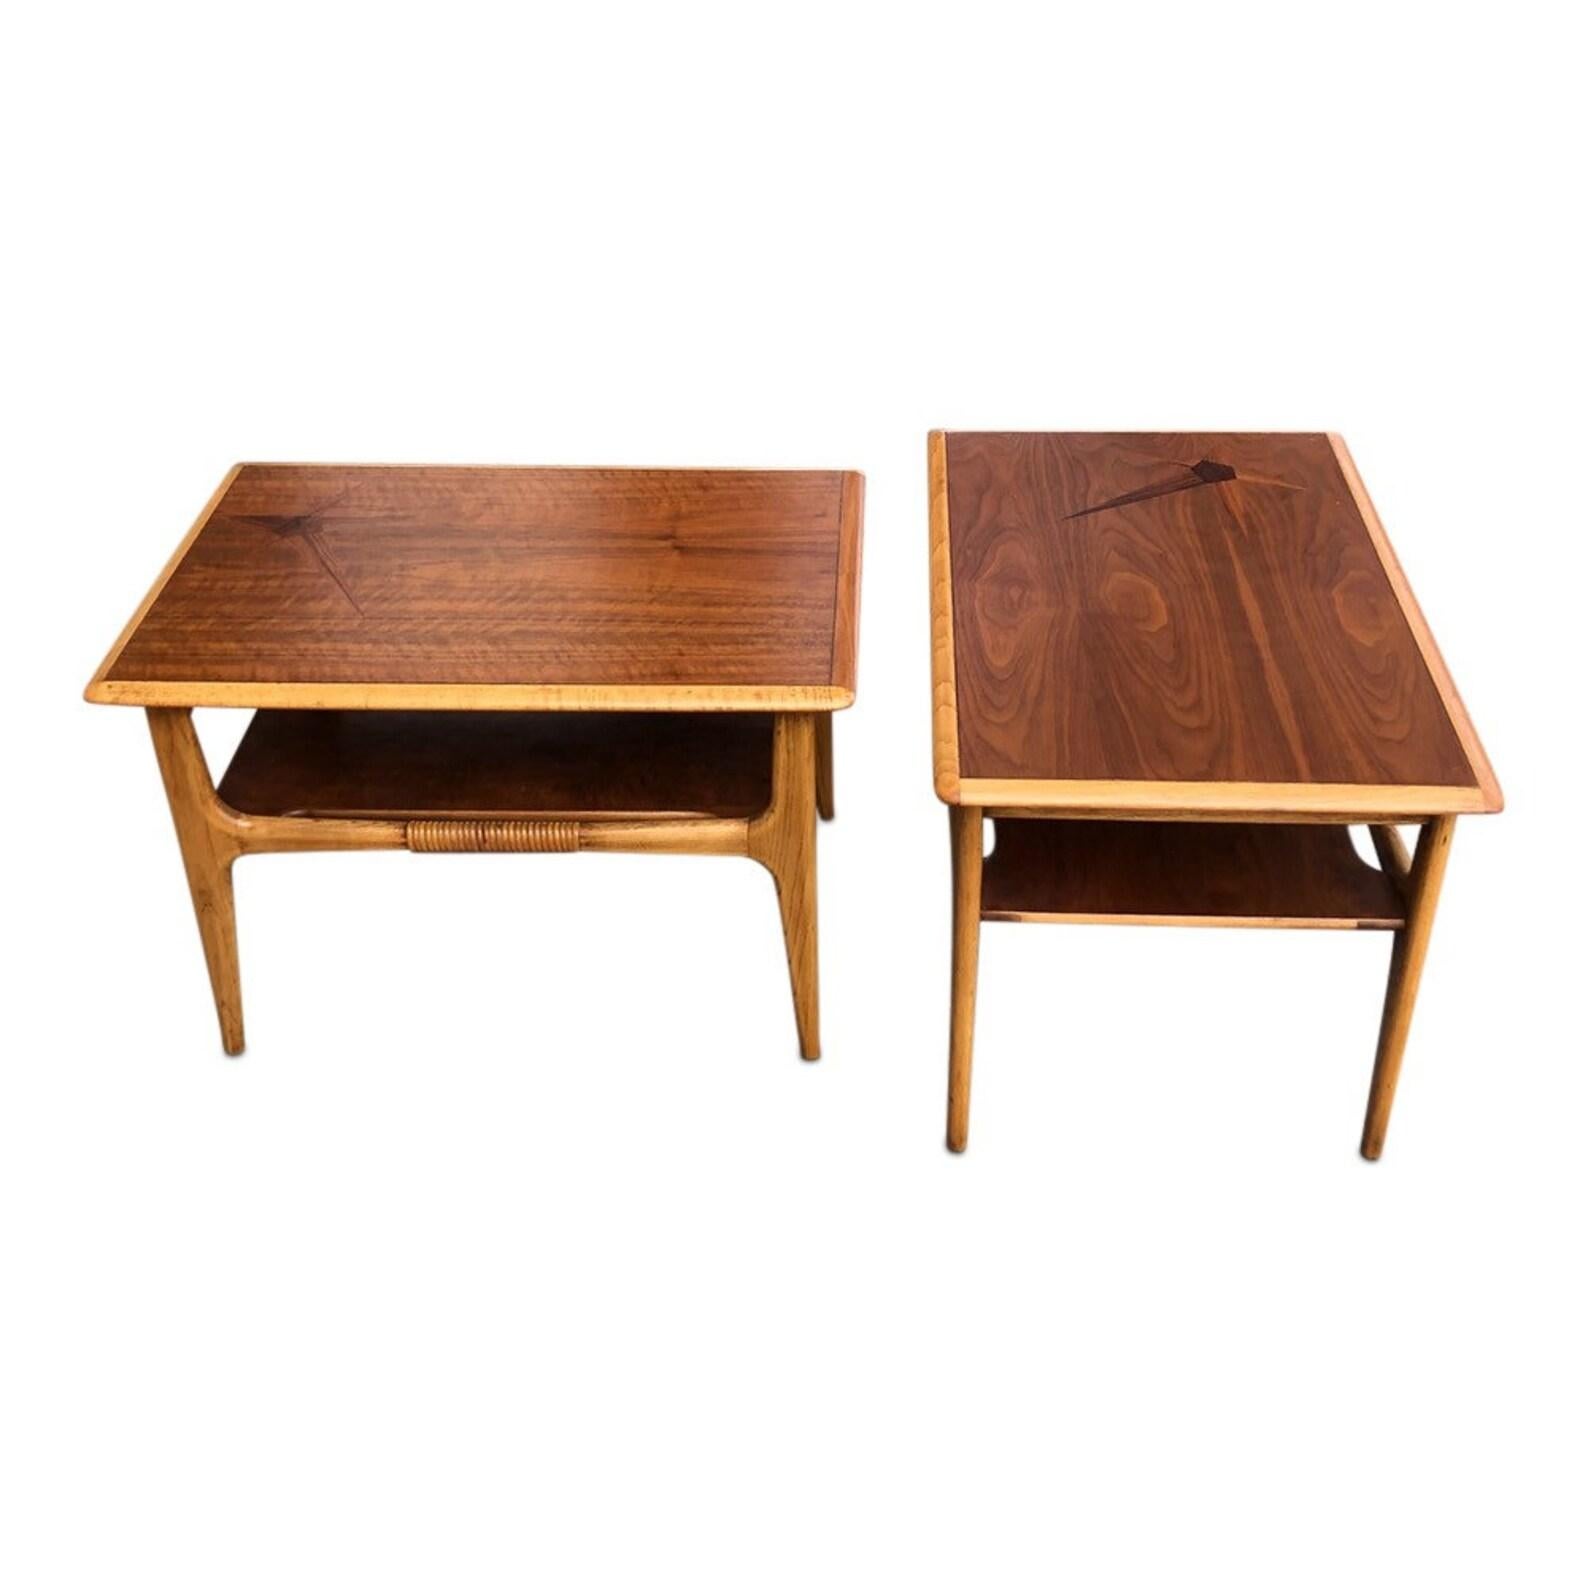 Pair of Mid-Century Modern two-toned side end tables with shelf and beautiful inlay on the surface. 

Dimensions: W30.5 x D20.5 x H20 inches 
Shelf height: 7 inches.